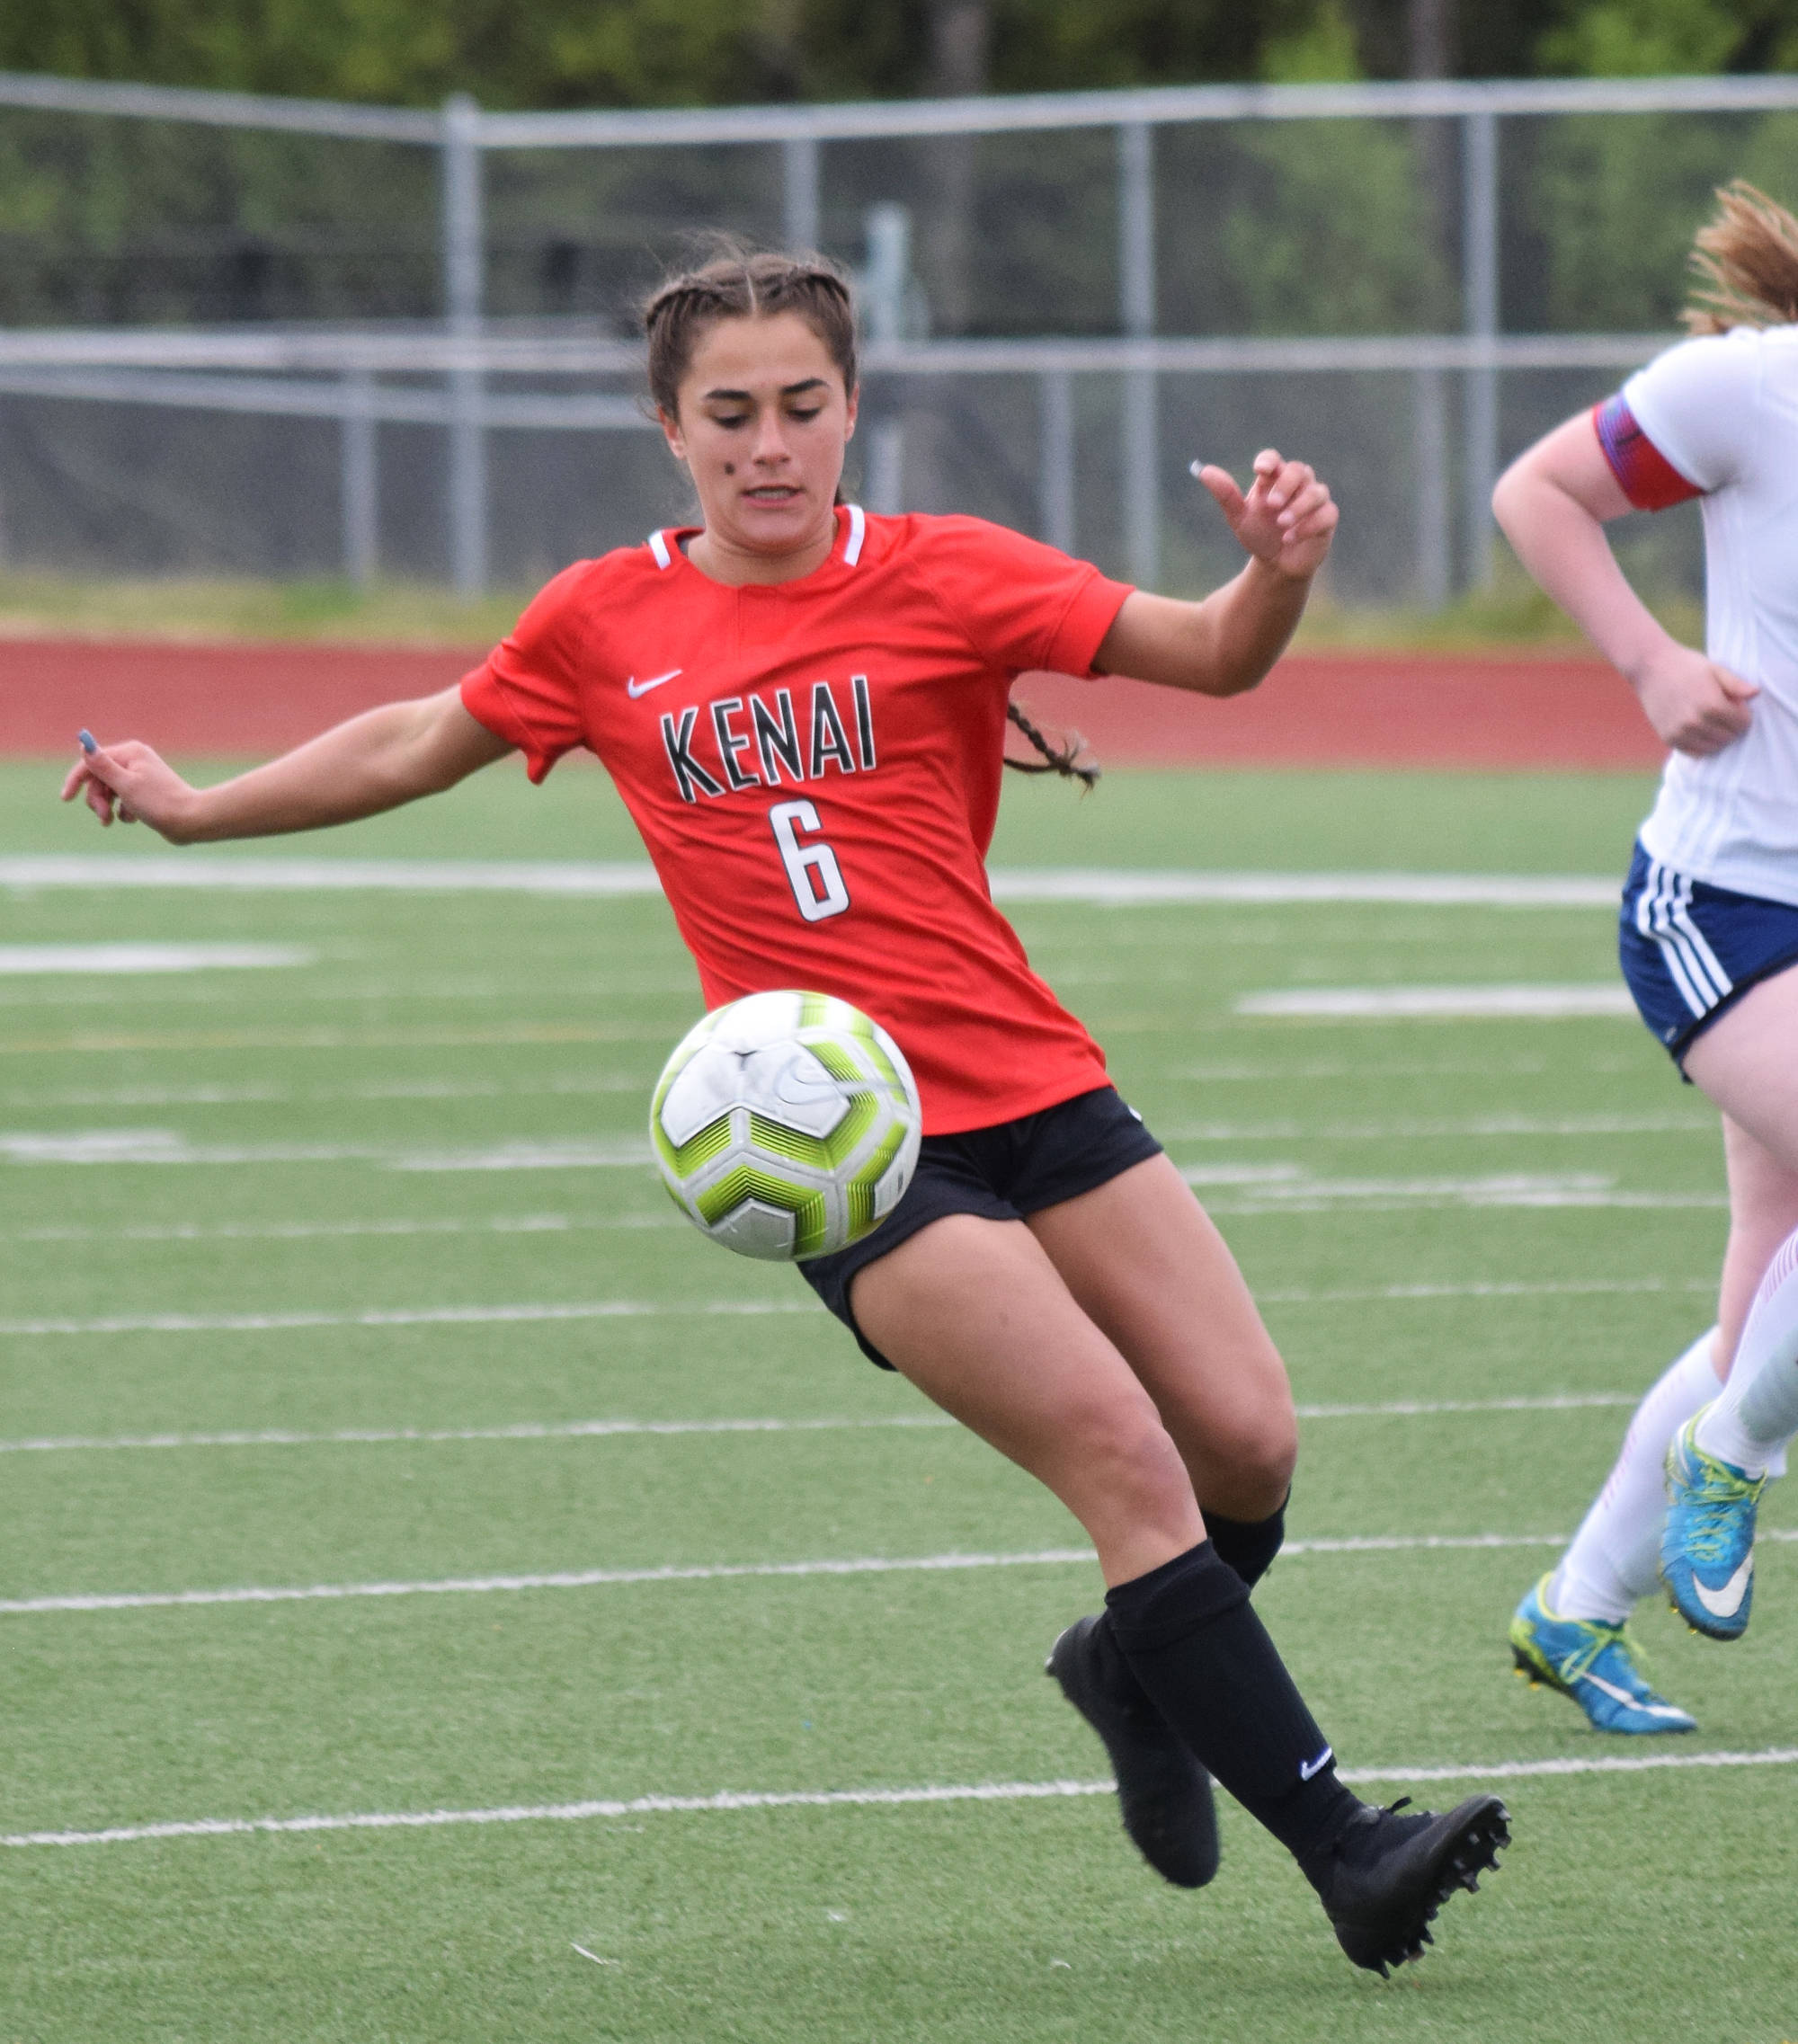 Kenai’s Alyssa Bucho works the ball up field against North Pole Thursday, May 23, 2019, at the Div. II state soccer championships in Eagle River. (Photo by Joey Klecka/Peninsula Clarion)